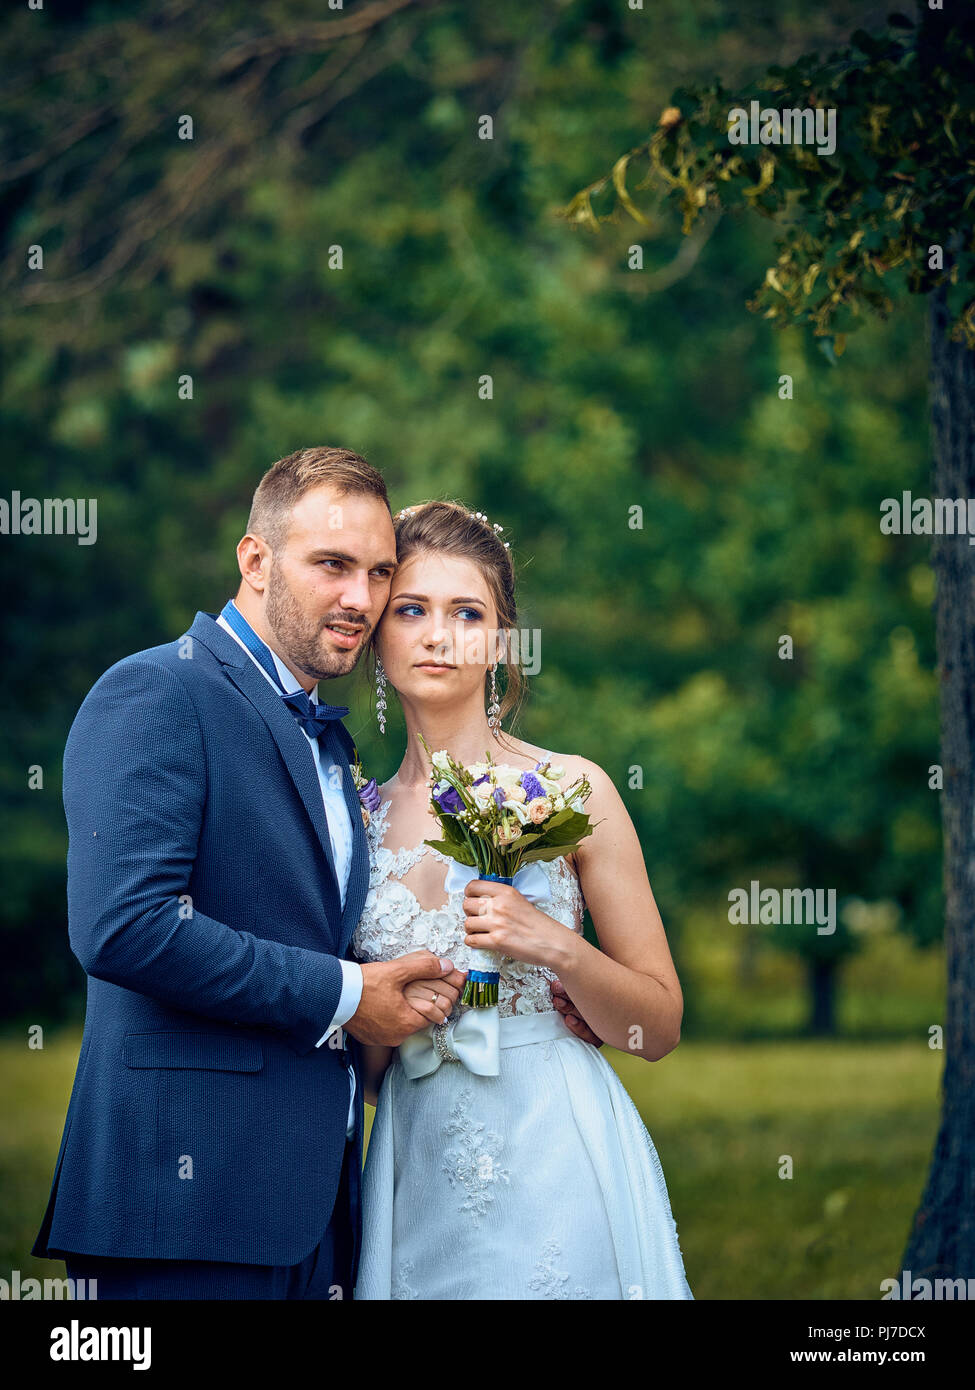 Solemn ceremony of marriage of the newlyweds. Customs and traditions inherited from a past life in the old Soviet Union. People have fun, drinking. Stock Photo